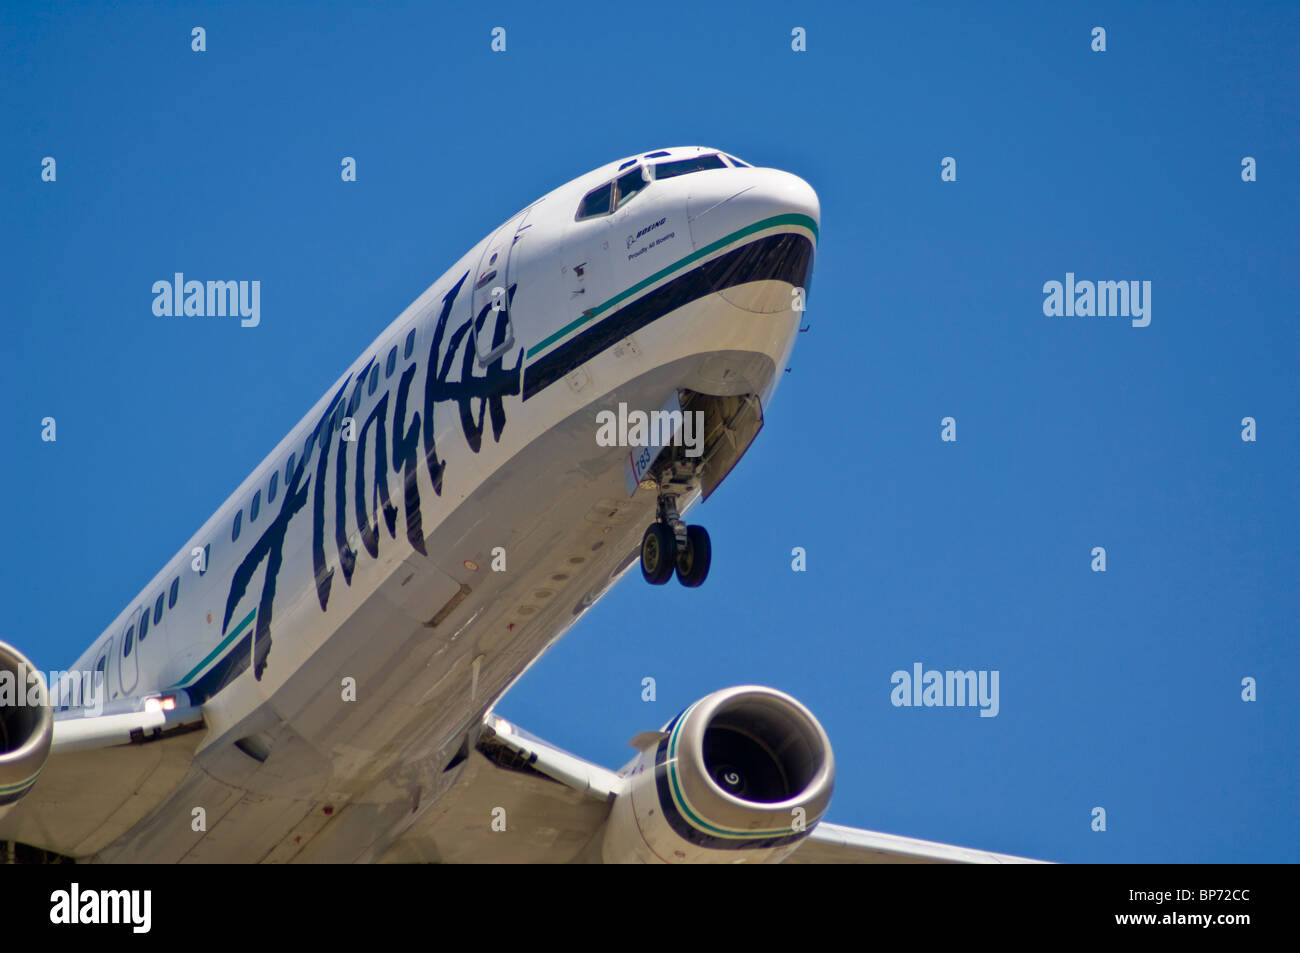 Alaska Airlines Boeing 737 in atterraggio a Los Angeles Int'l Airport LAX, Los Angeles, California Foto Stock